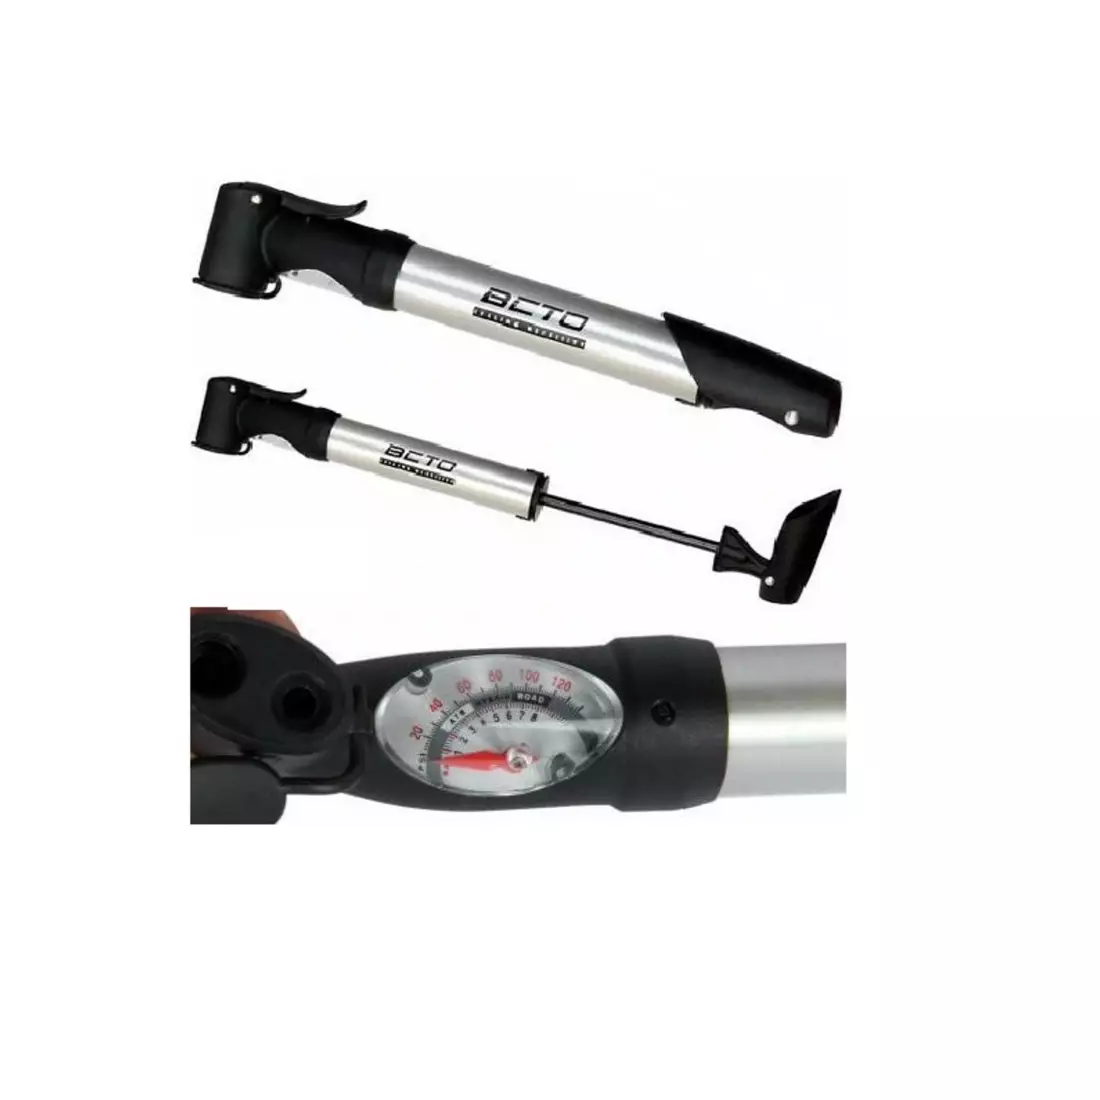 BETO manual bicycle pump CLD-023G 120psi CLD-023G